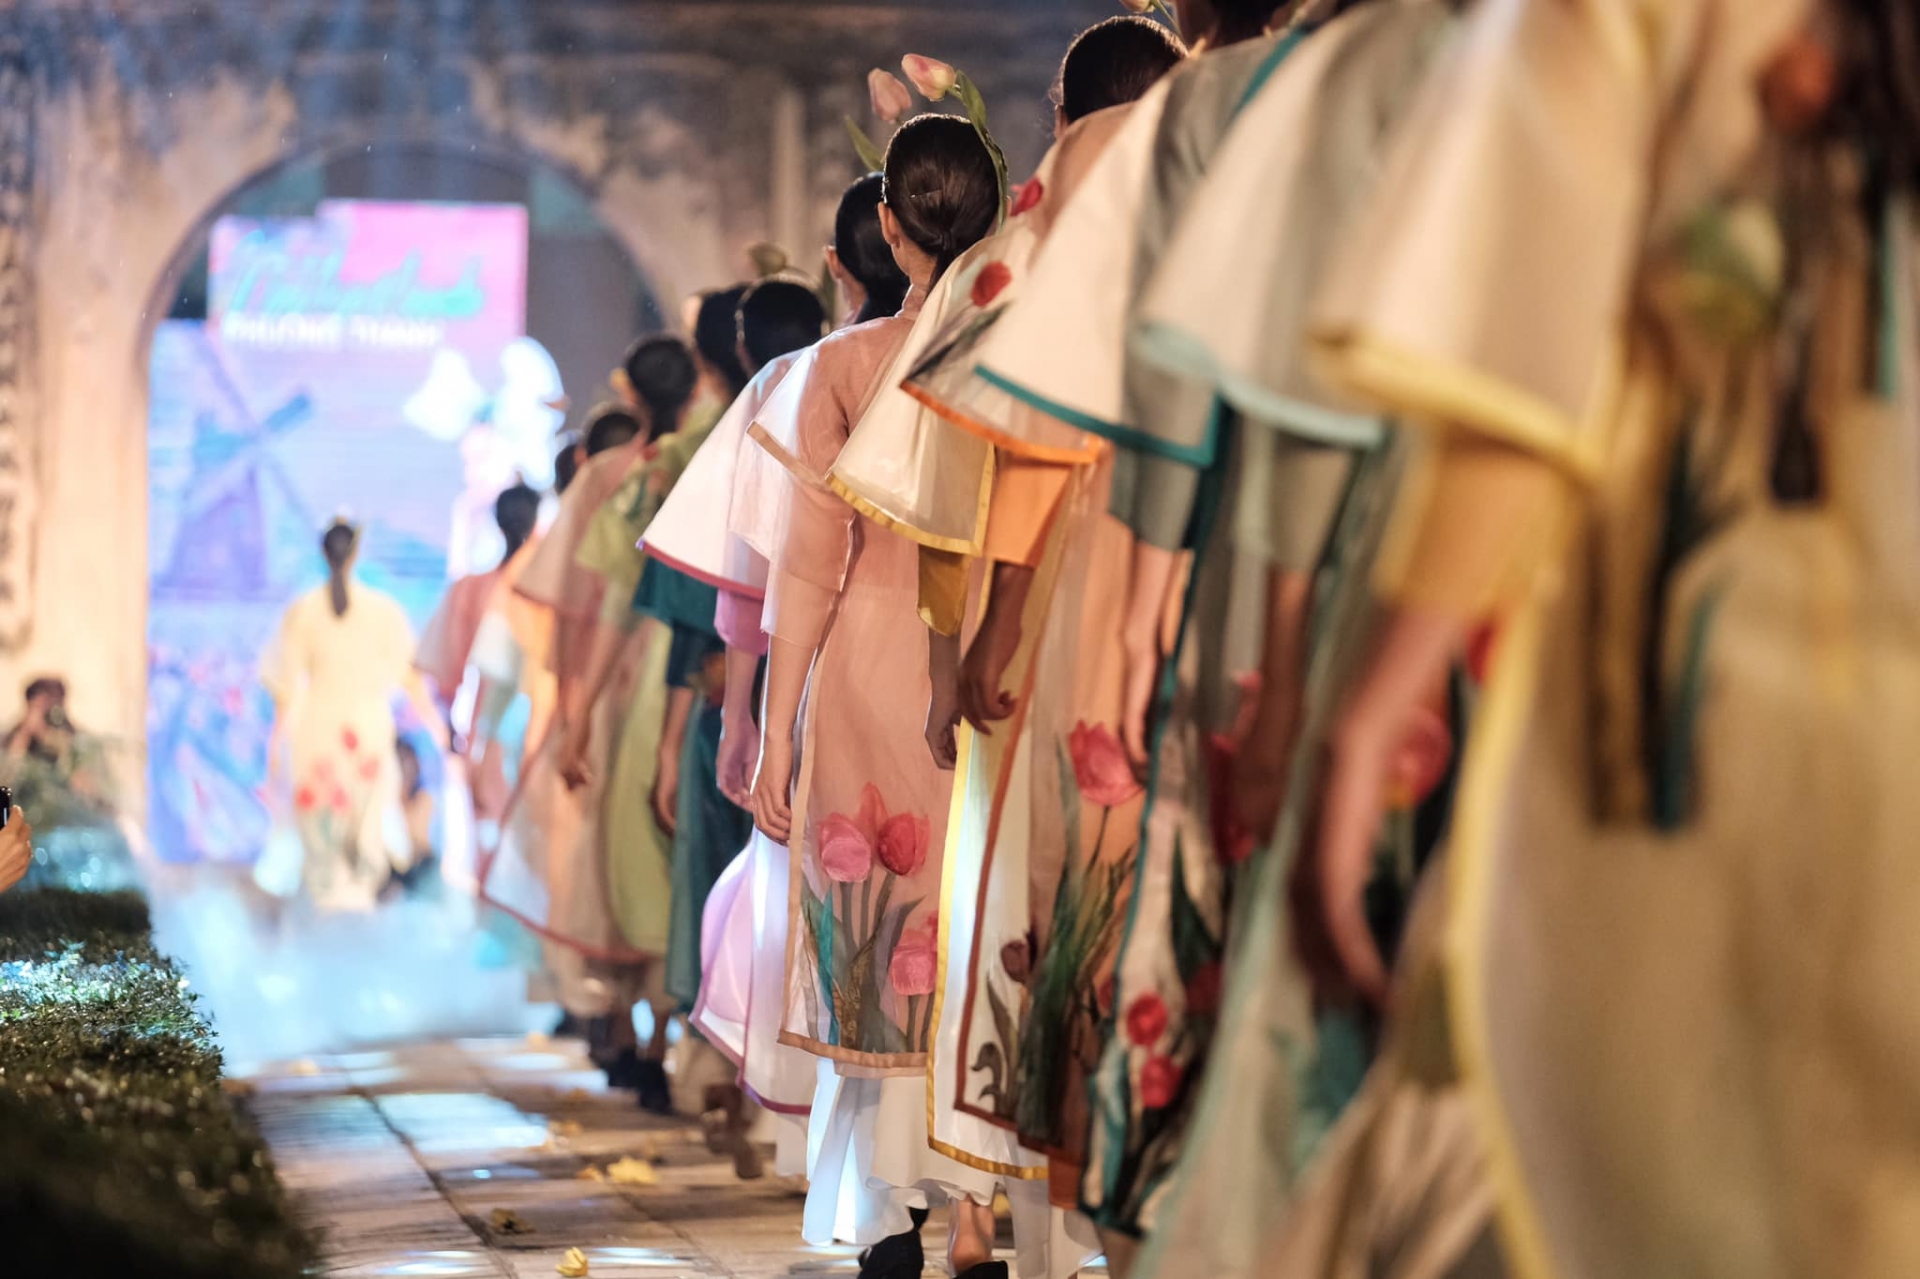 More than 600 Ao Dai designs take stage in Hanoi